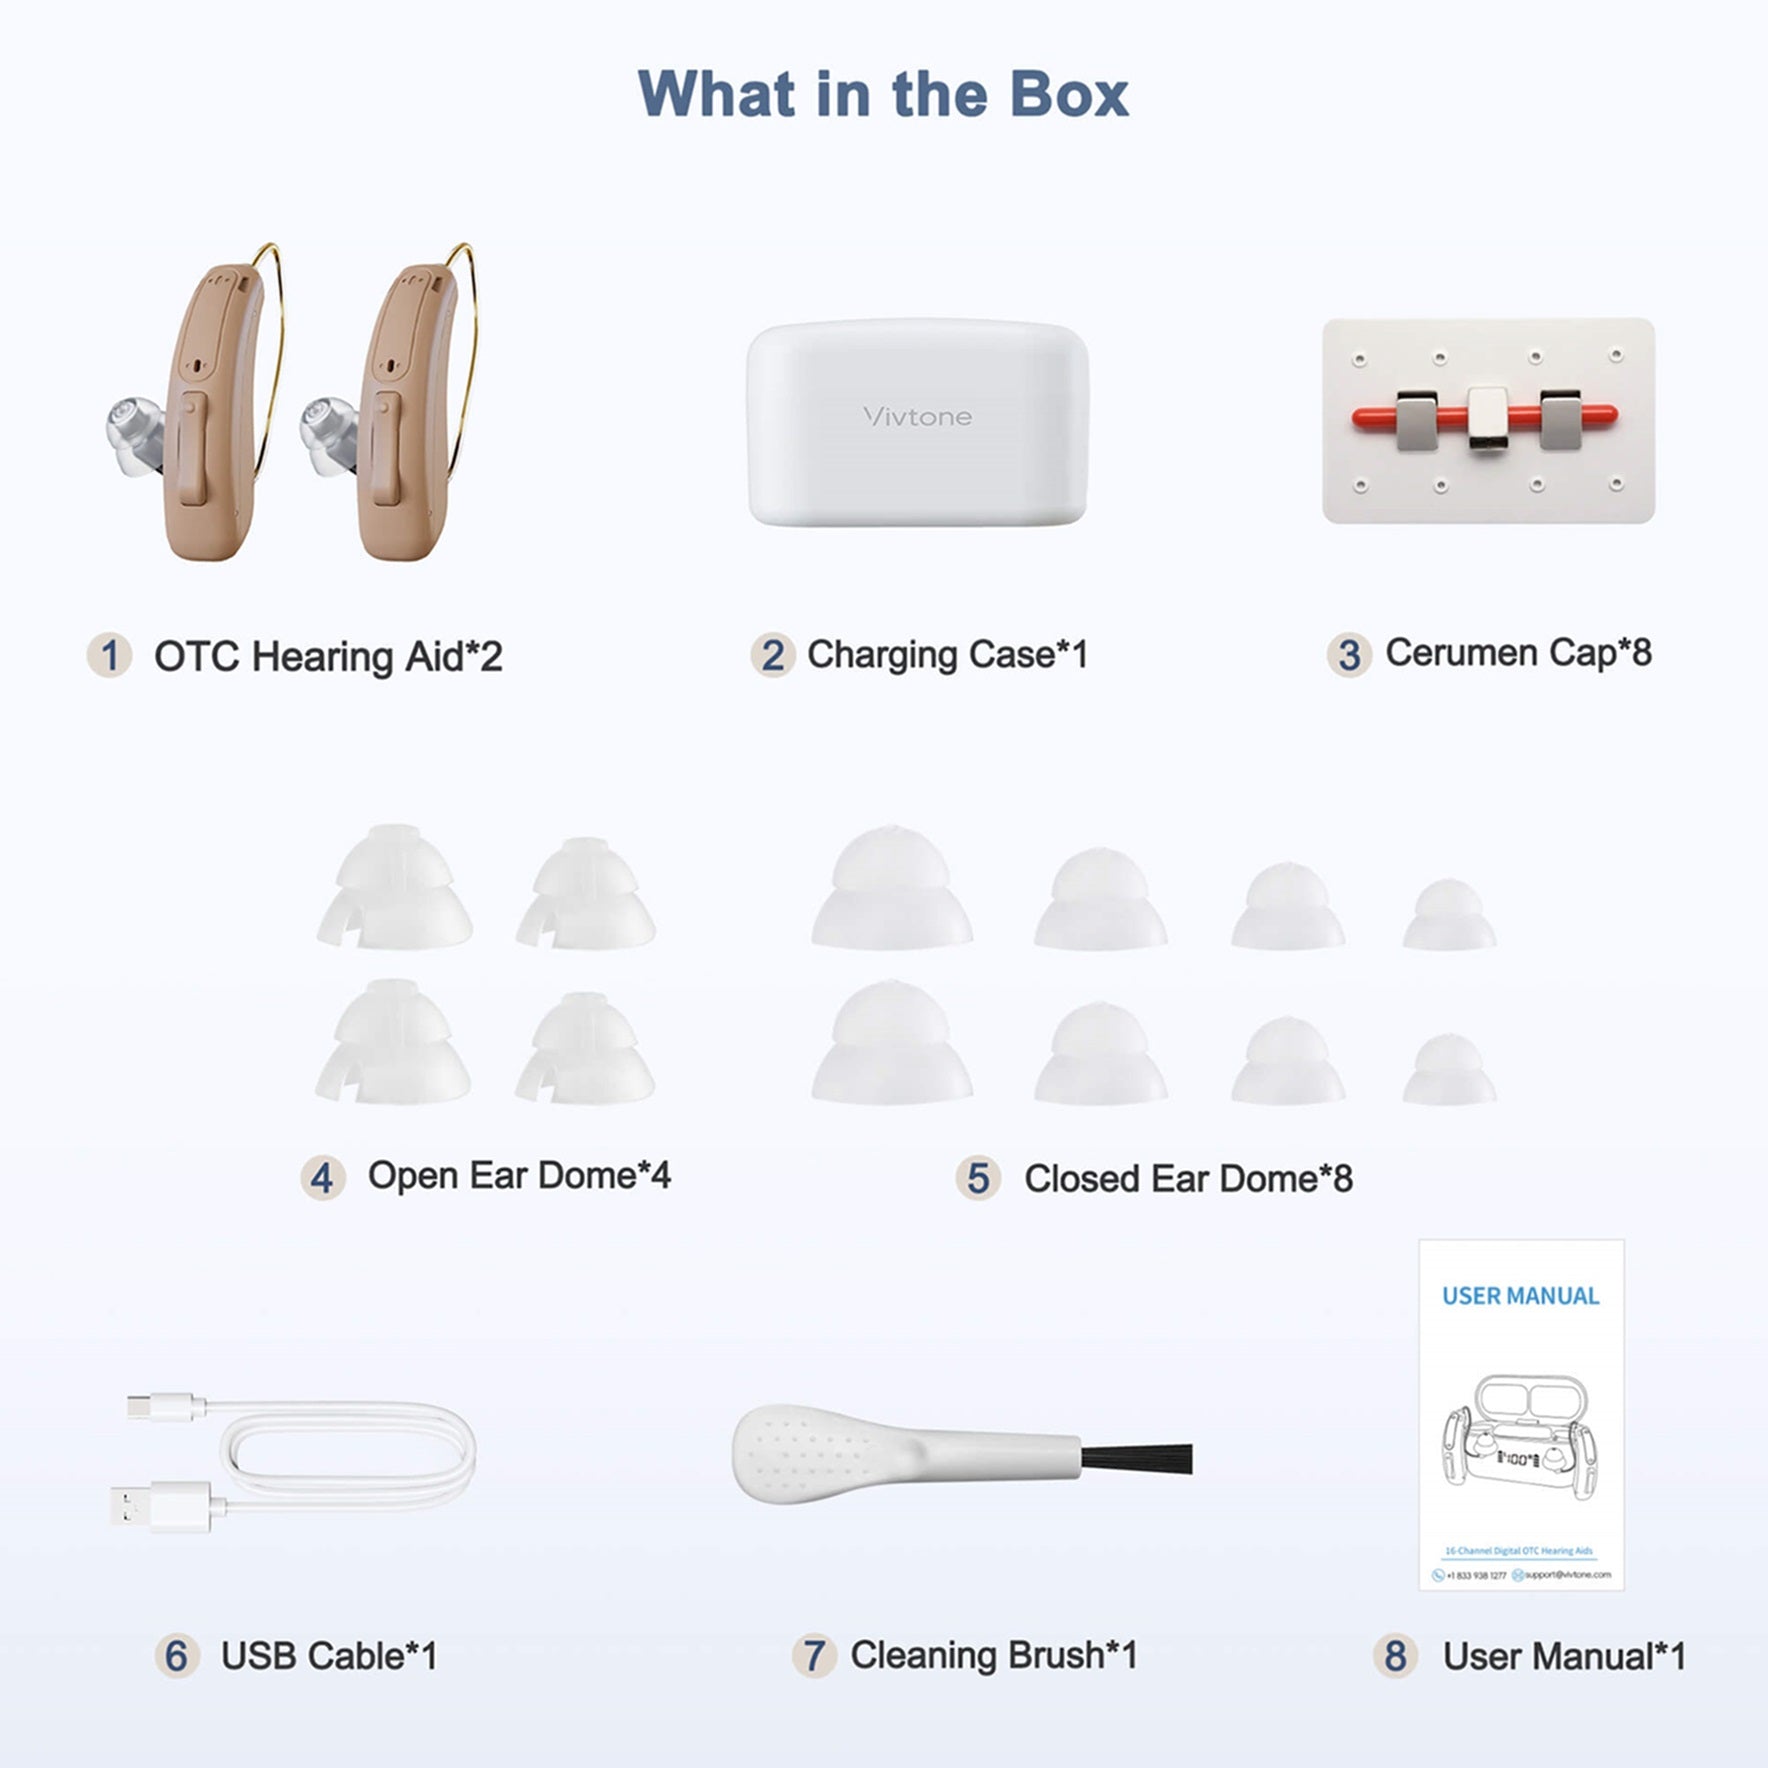 Hearing Aids OTC - Lucid516 RIC-d2: Perfect for TV Hearing Aids, Hearing Aids Reviews Acclaimed, AirPods as Hearing Aids